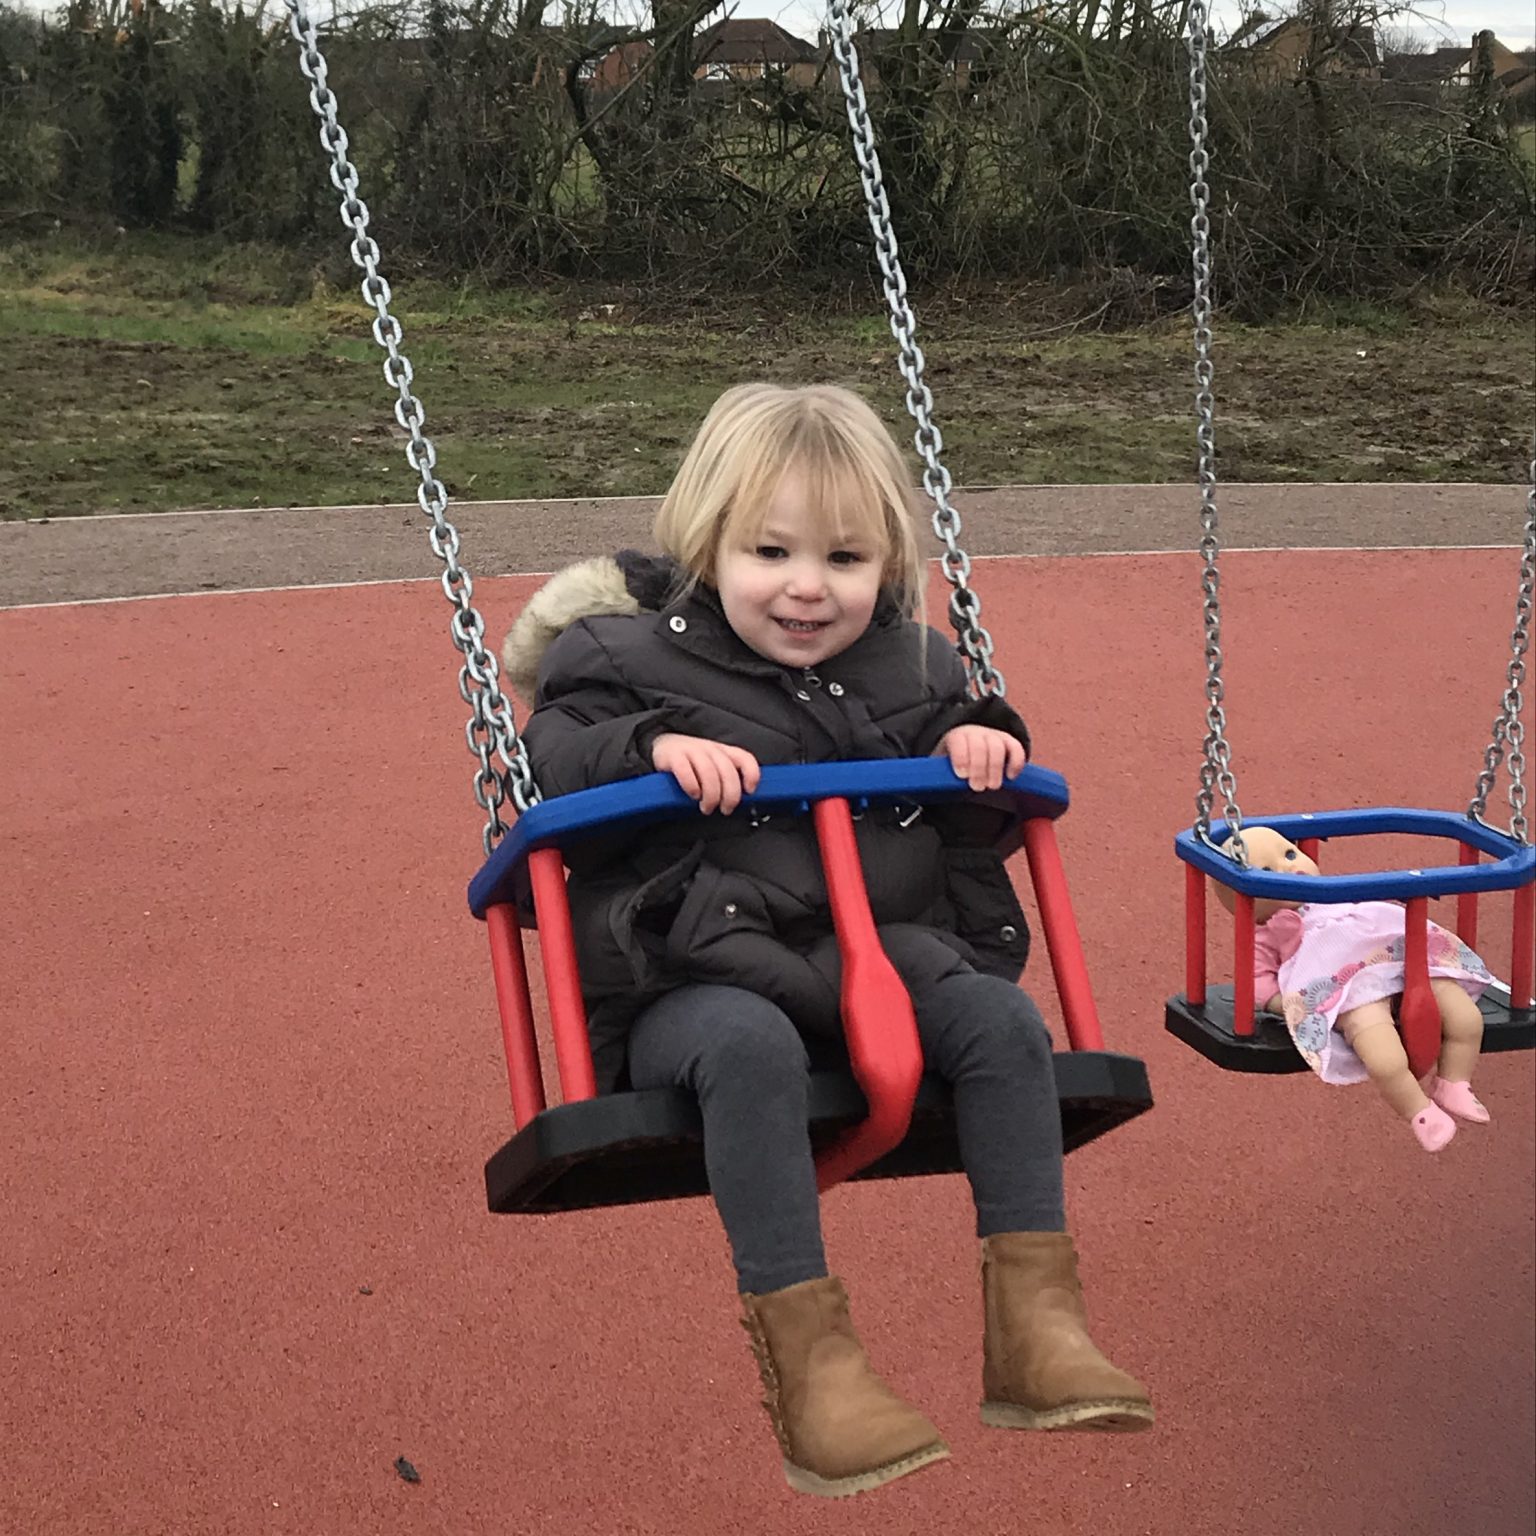 New Lubbesthorpe play area swings into action – New Lubbesthorpe